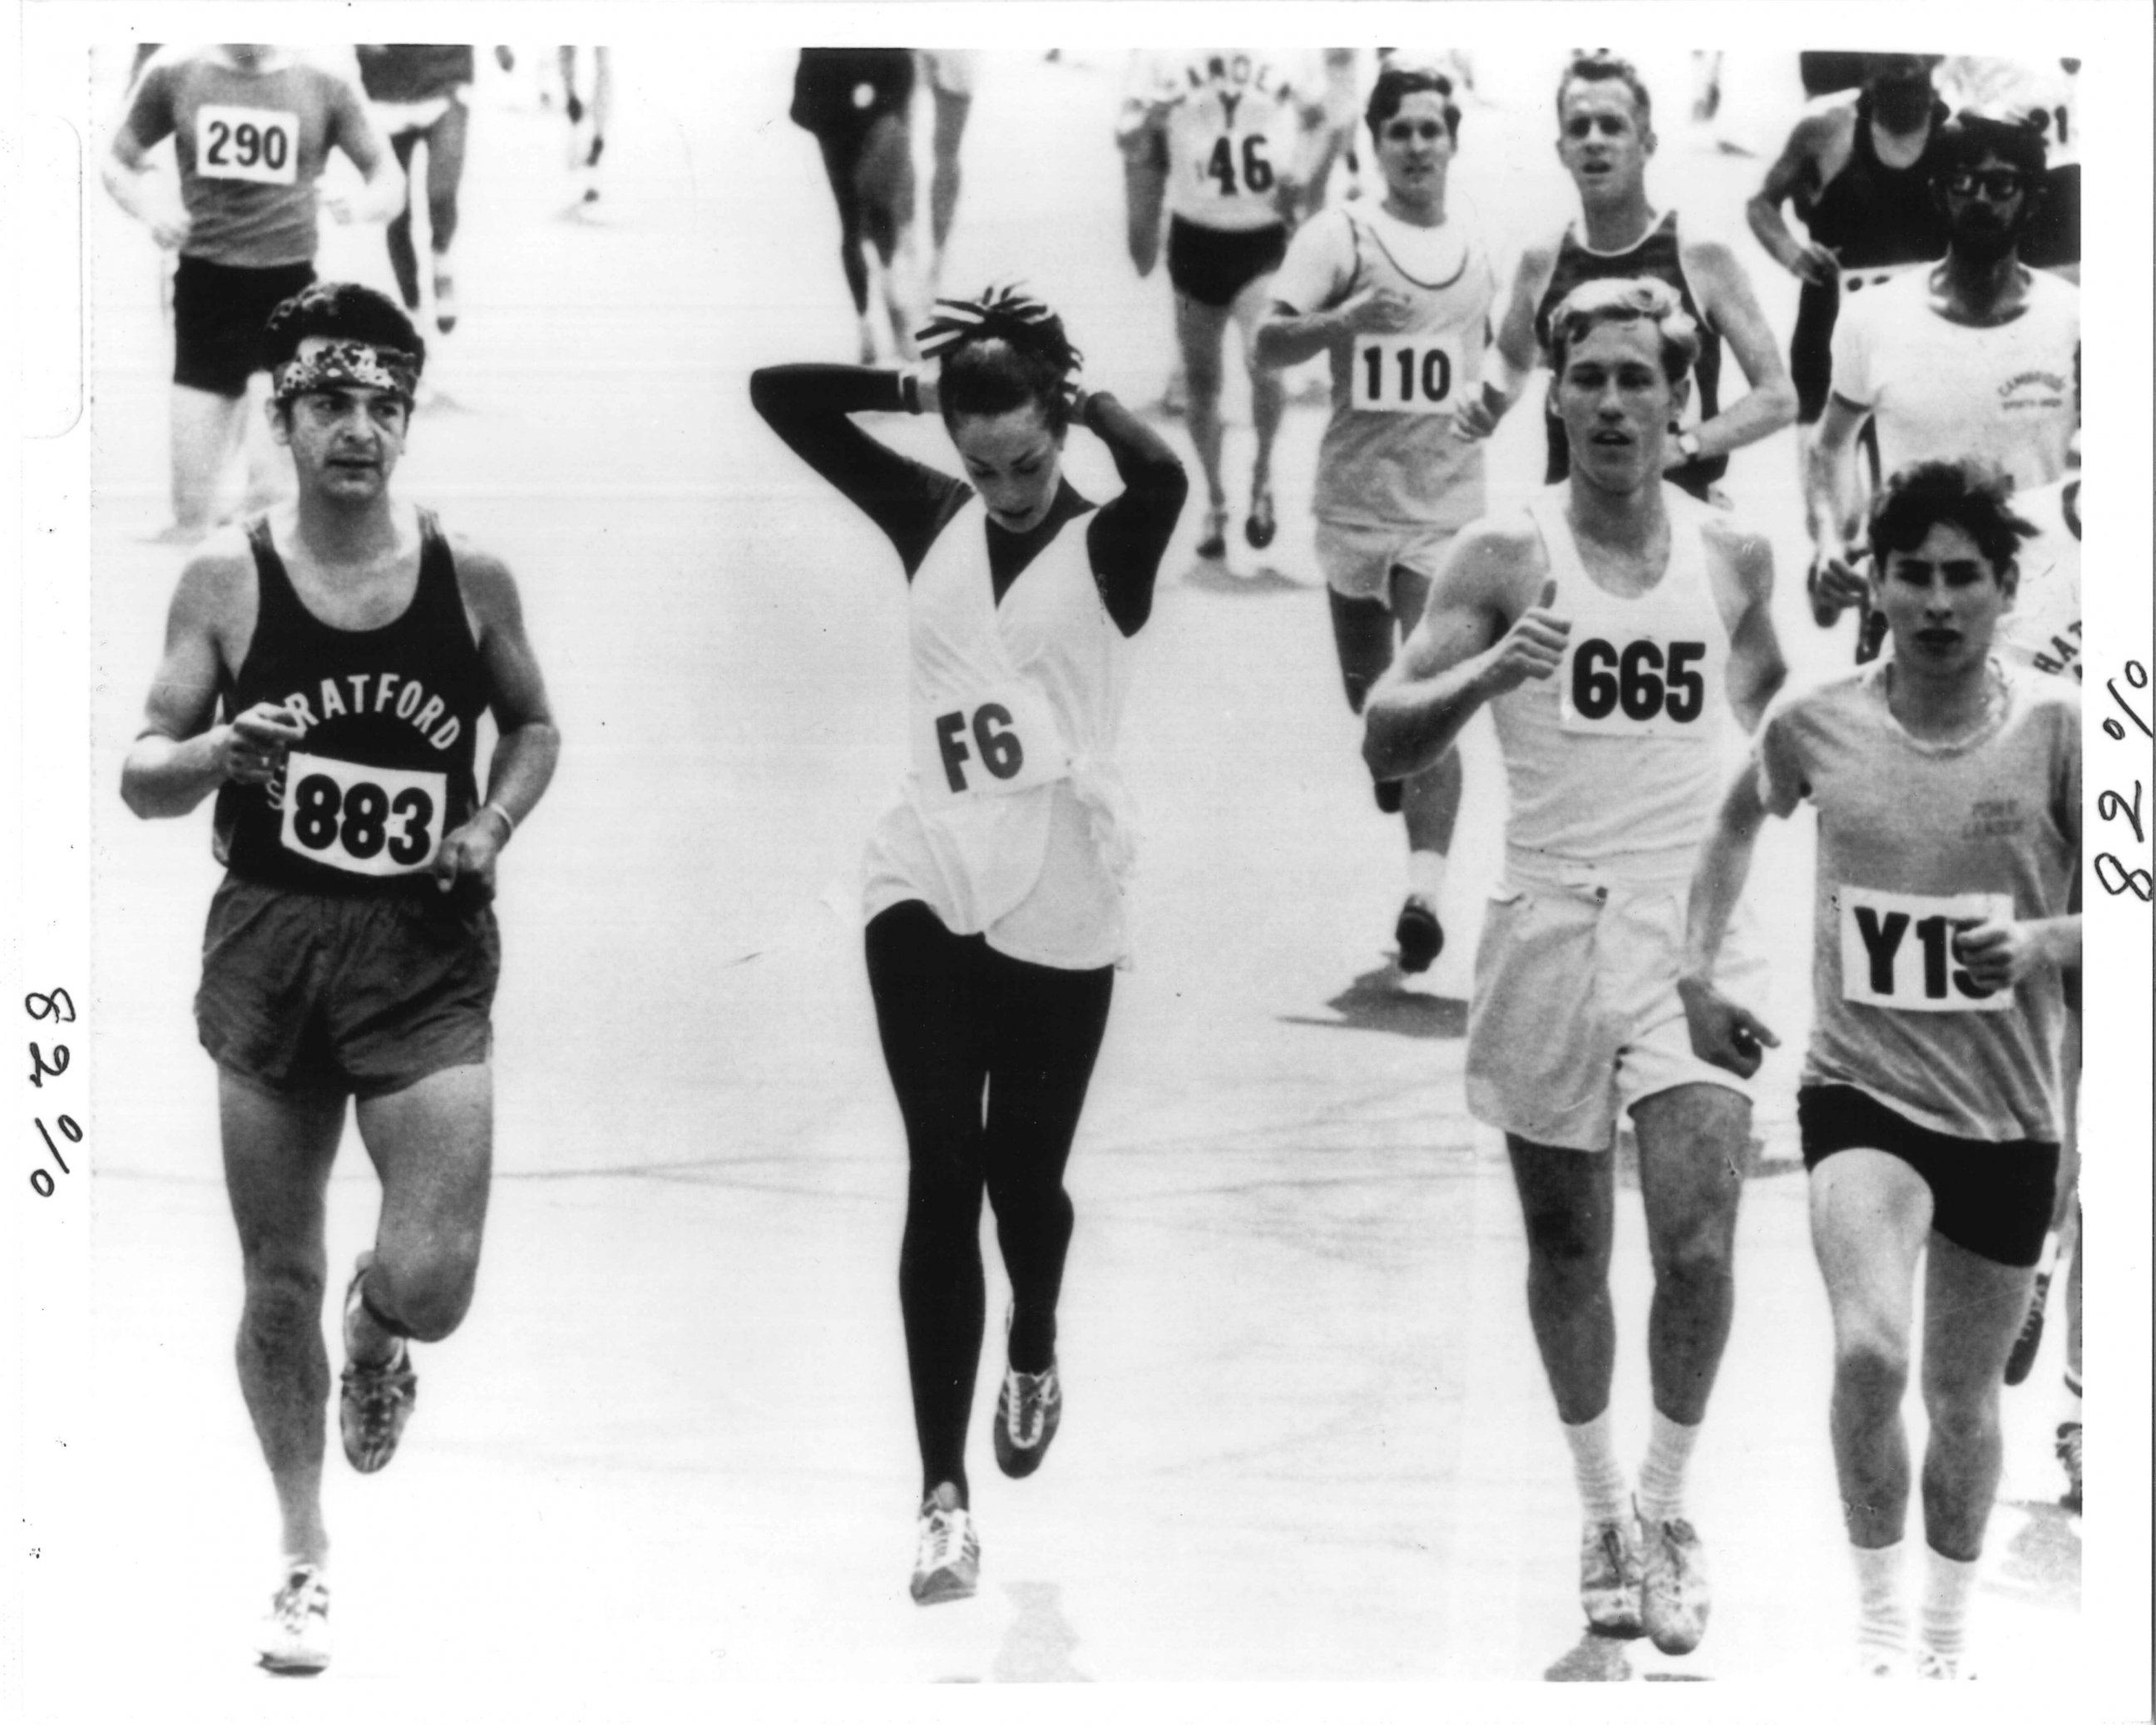 PHOTO: In 1972 Boston Marathon, women were officially allowed for the first time. A photographer caught Switzer pinning up her hair mid-race.